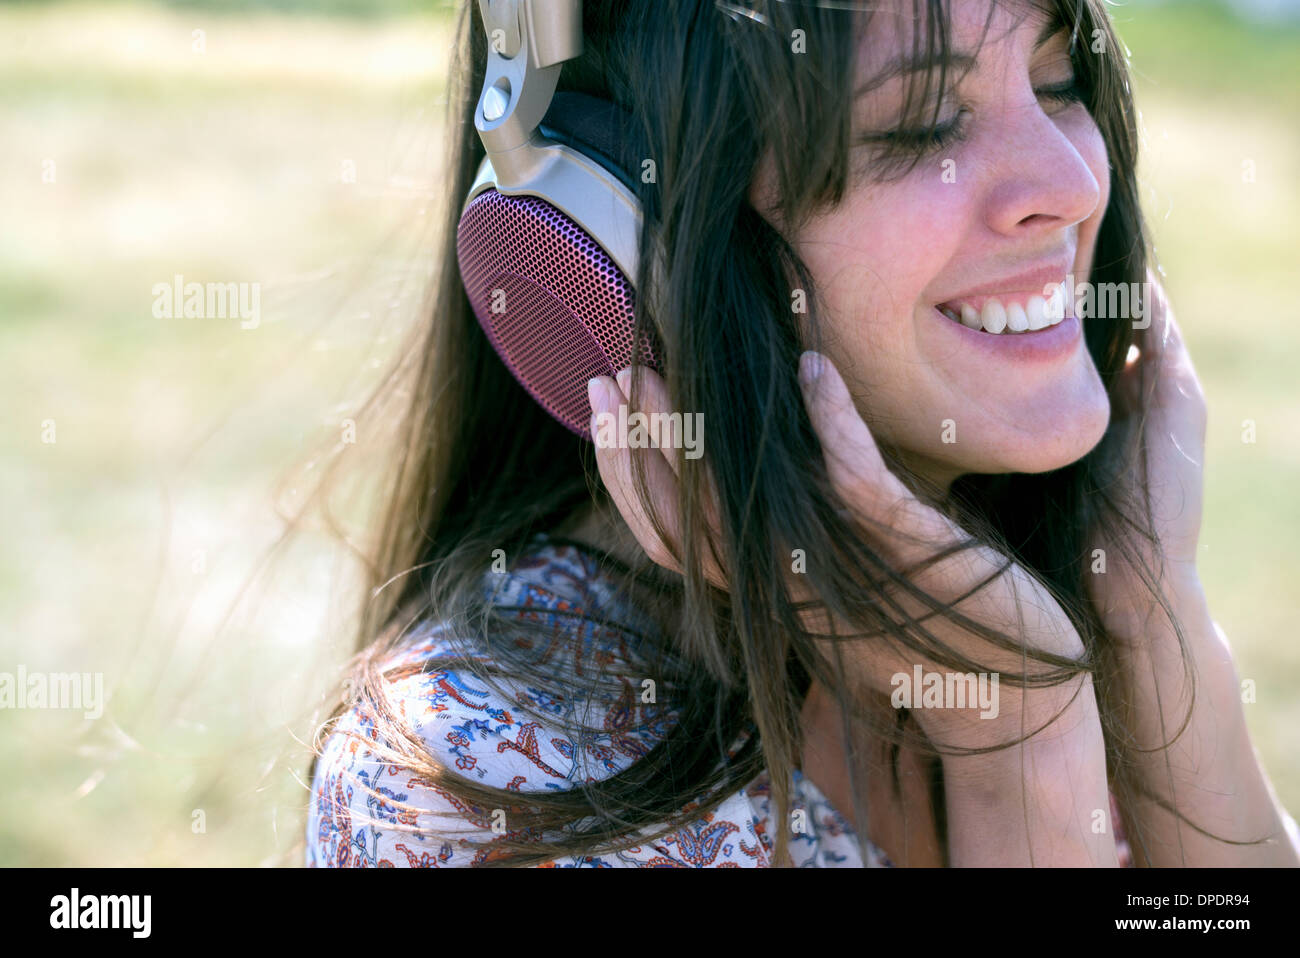 Mid adult woman wearing Headphones with eyes closed Banque D'Images